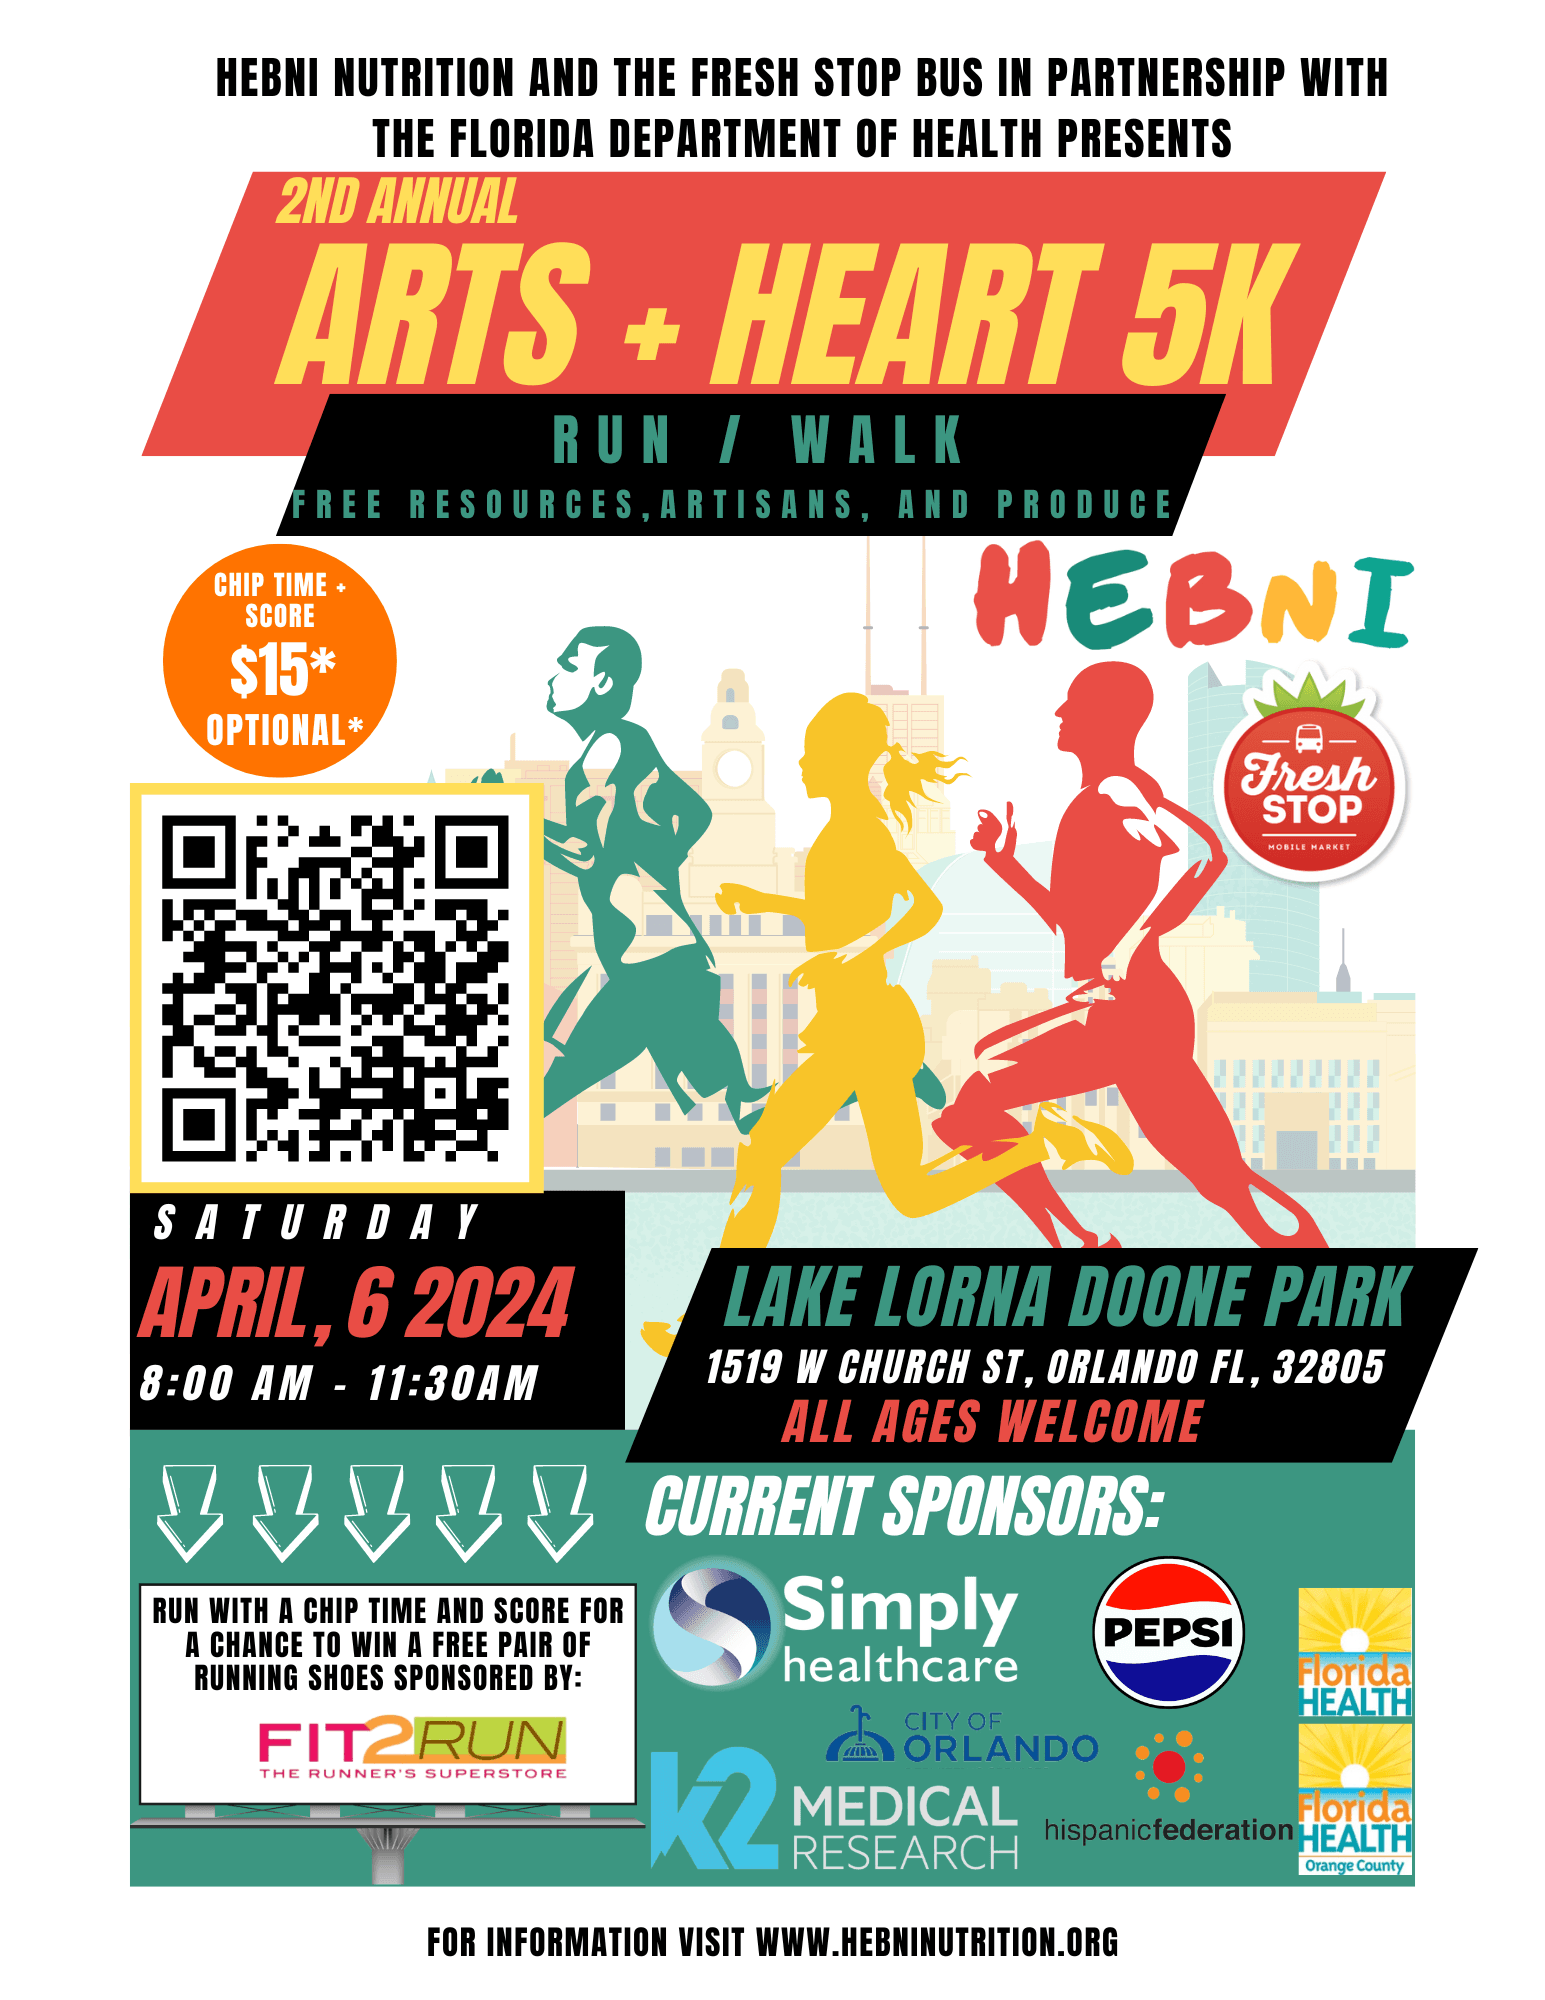 Submit an application here to be a vendor at the Art’s and Heart 5k! 